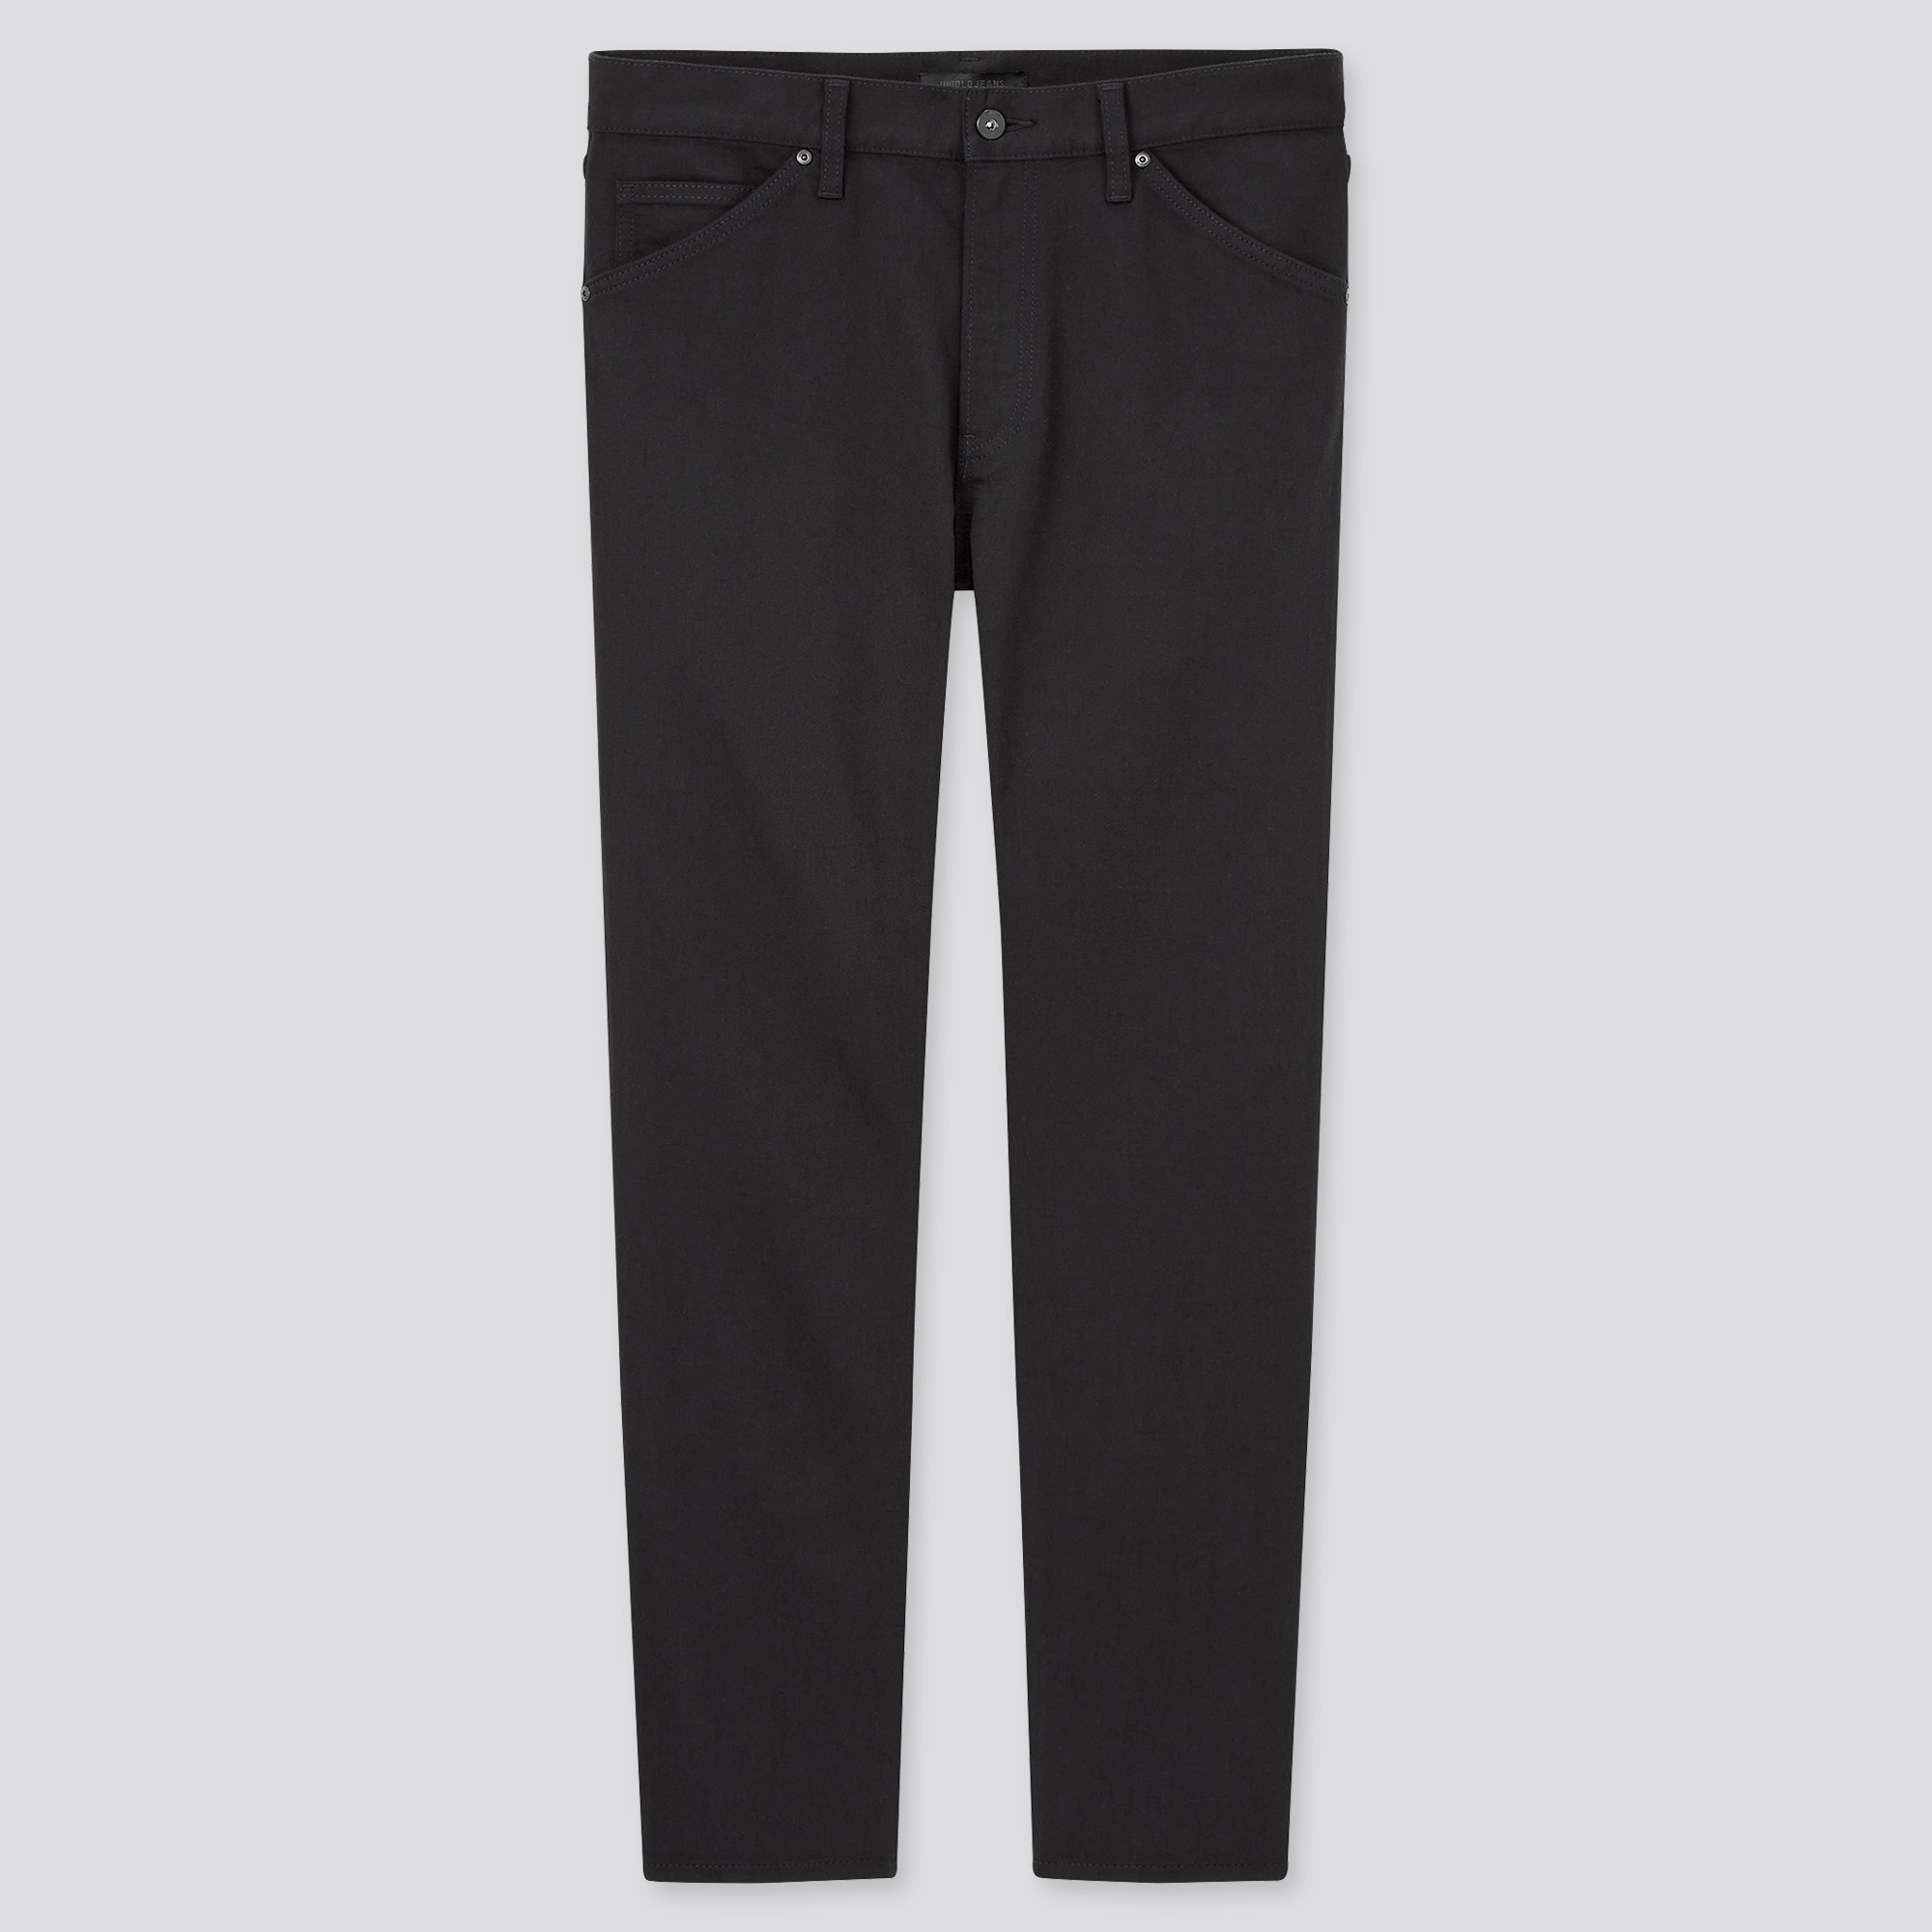 UNIQLO Maternity Ultra Stretch Jeans | StyleHint